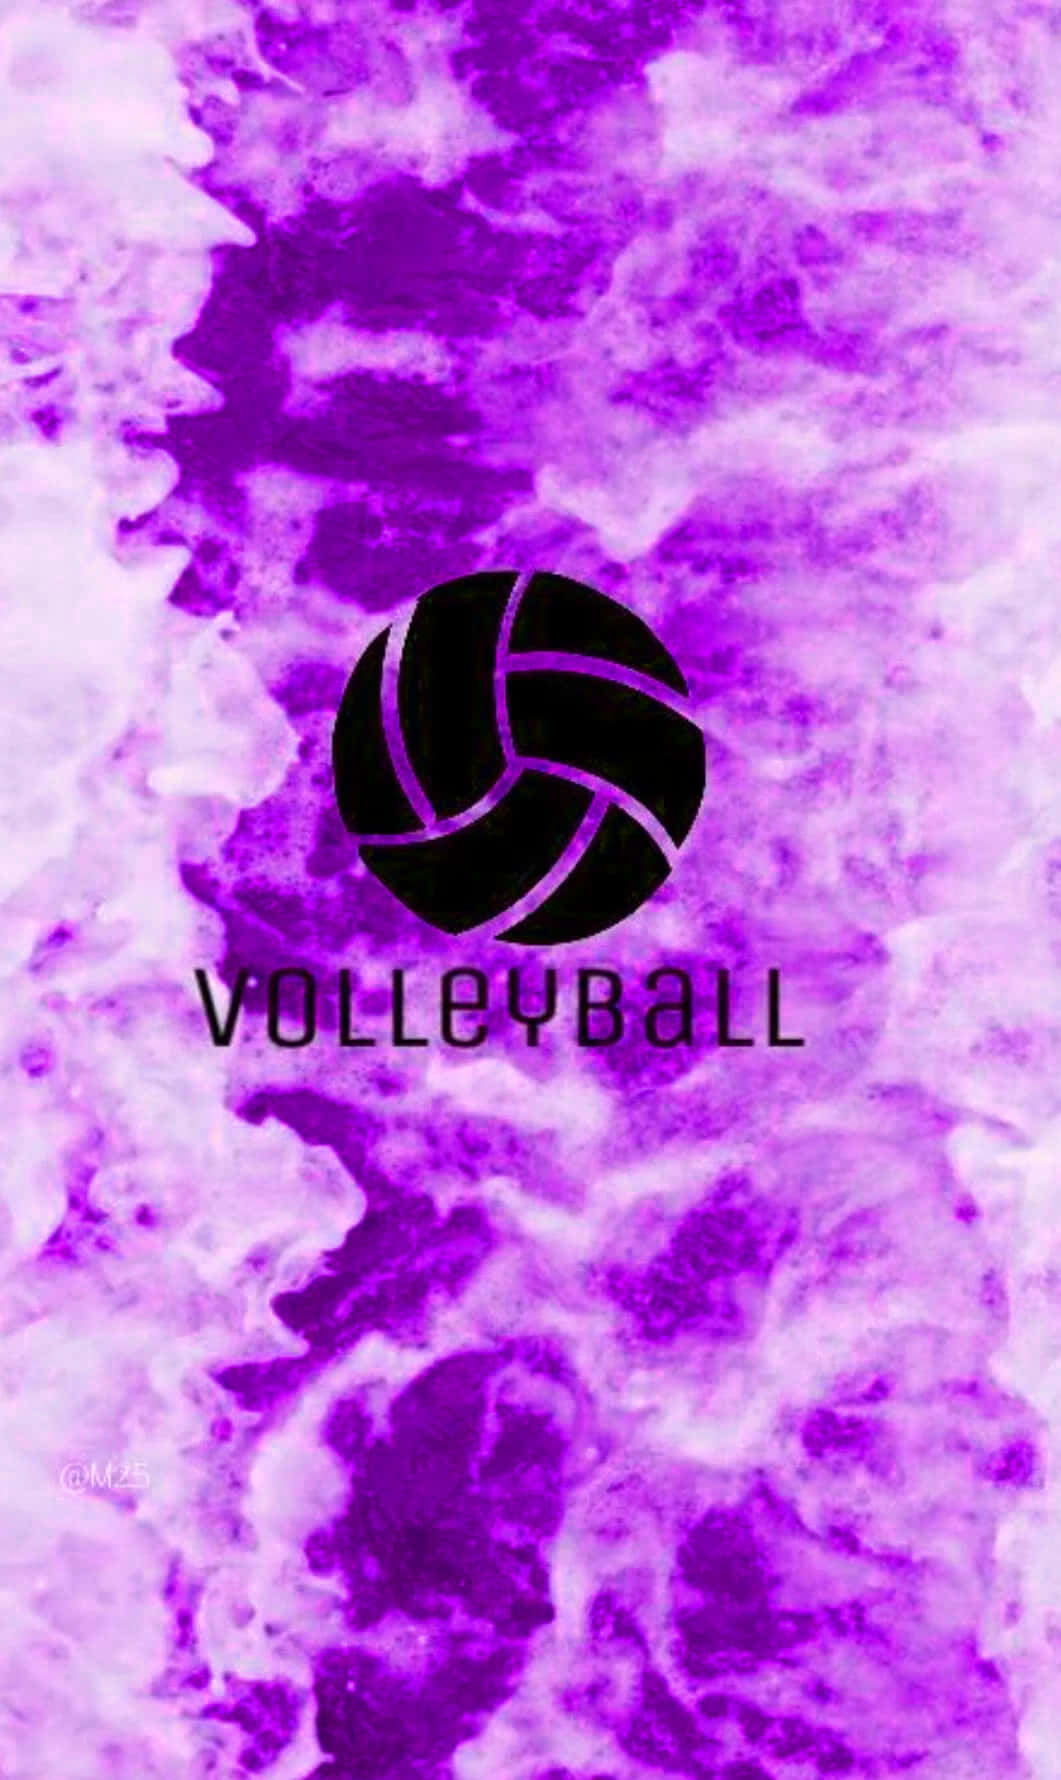 A beach volleyball ball with white and blue for optimal visibility. Wallpaper